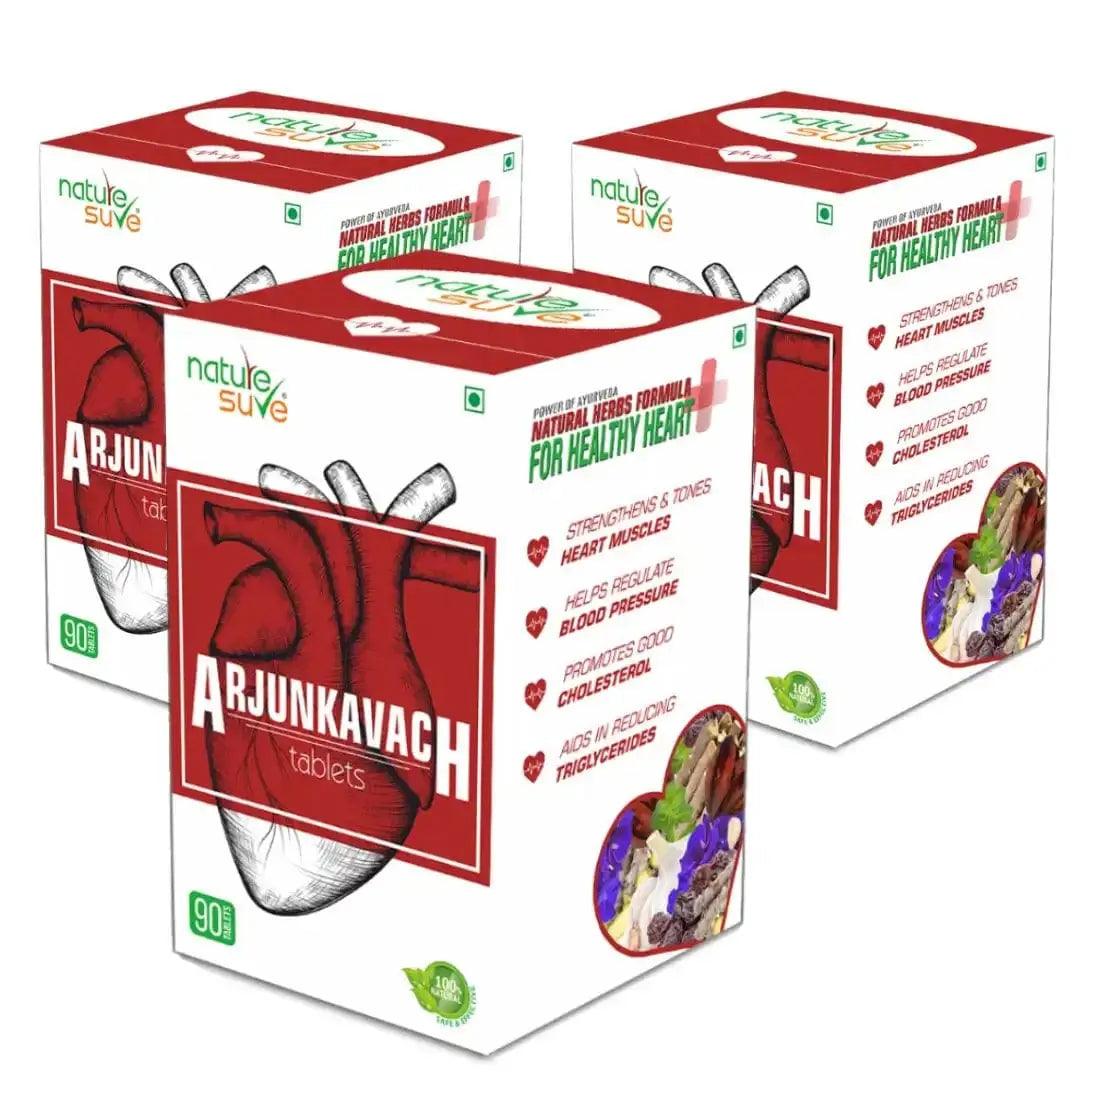 Buy 3 Packs of Nature Sure Arjun Kavach Tablets for Healthy Heart in Men and Women